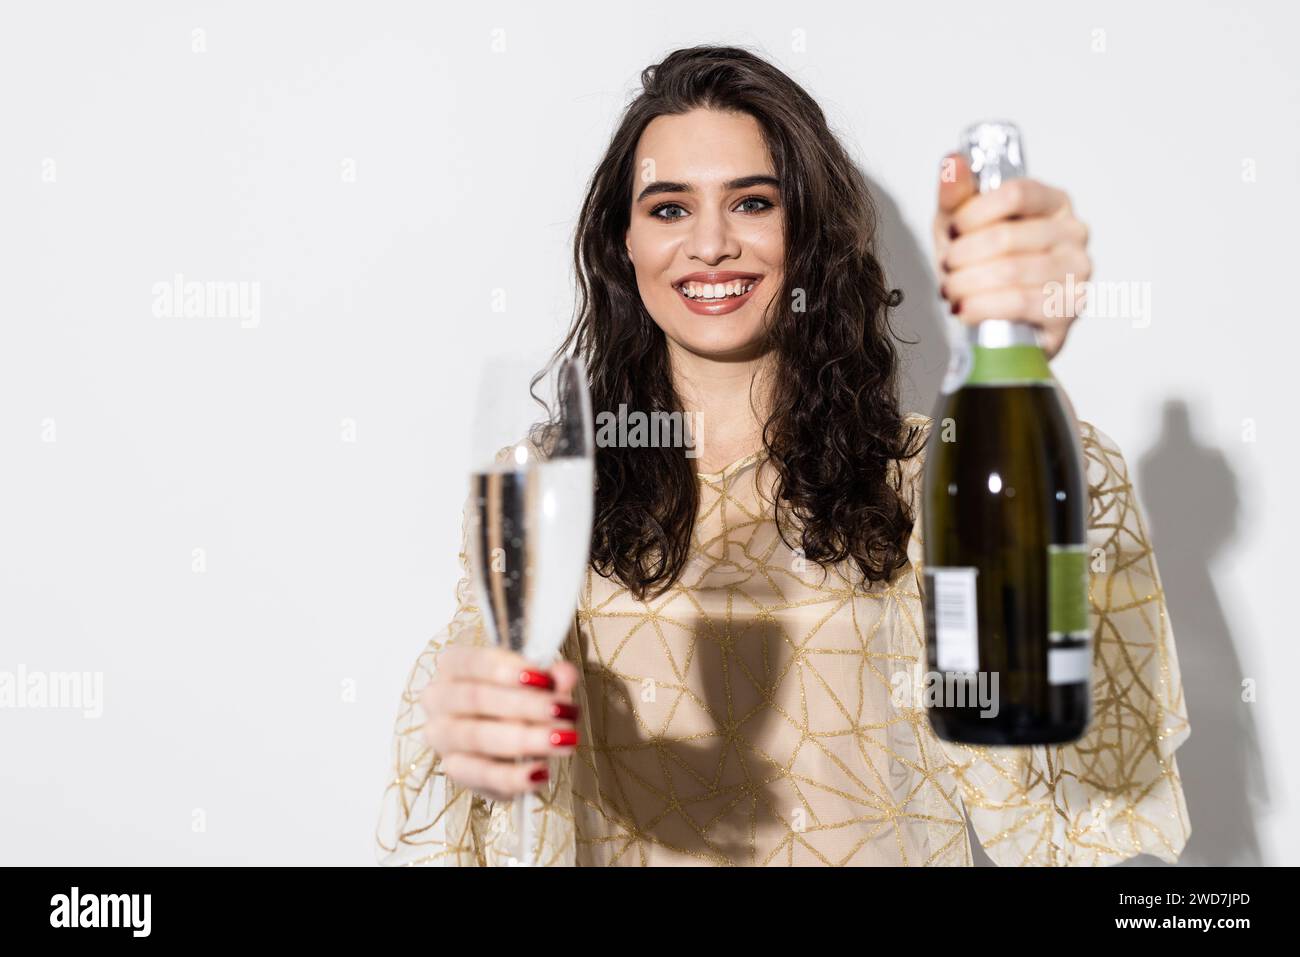 Cheerful elegant woman having fun on party, celebrating something, dancing with bottle and glass of champagne, standing over white background Stock Photo